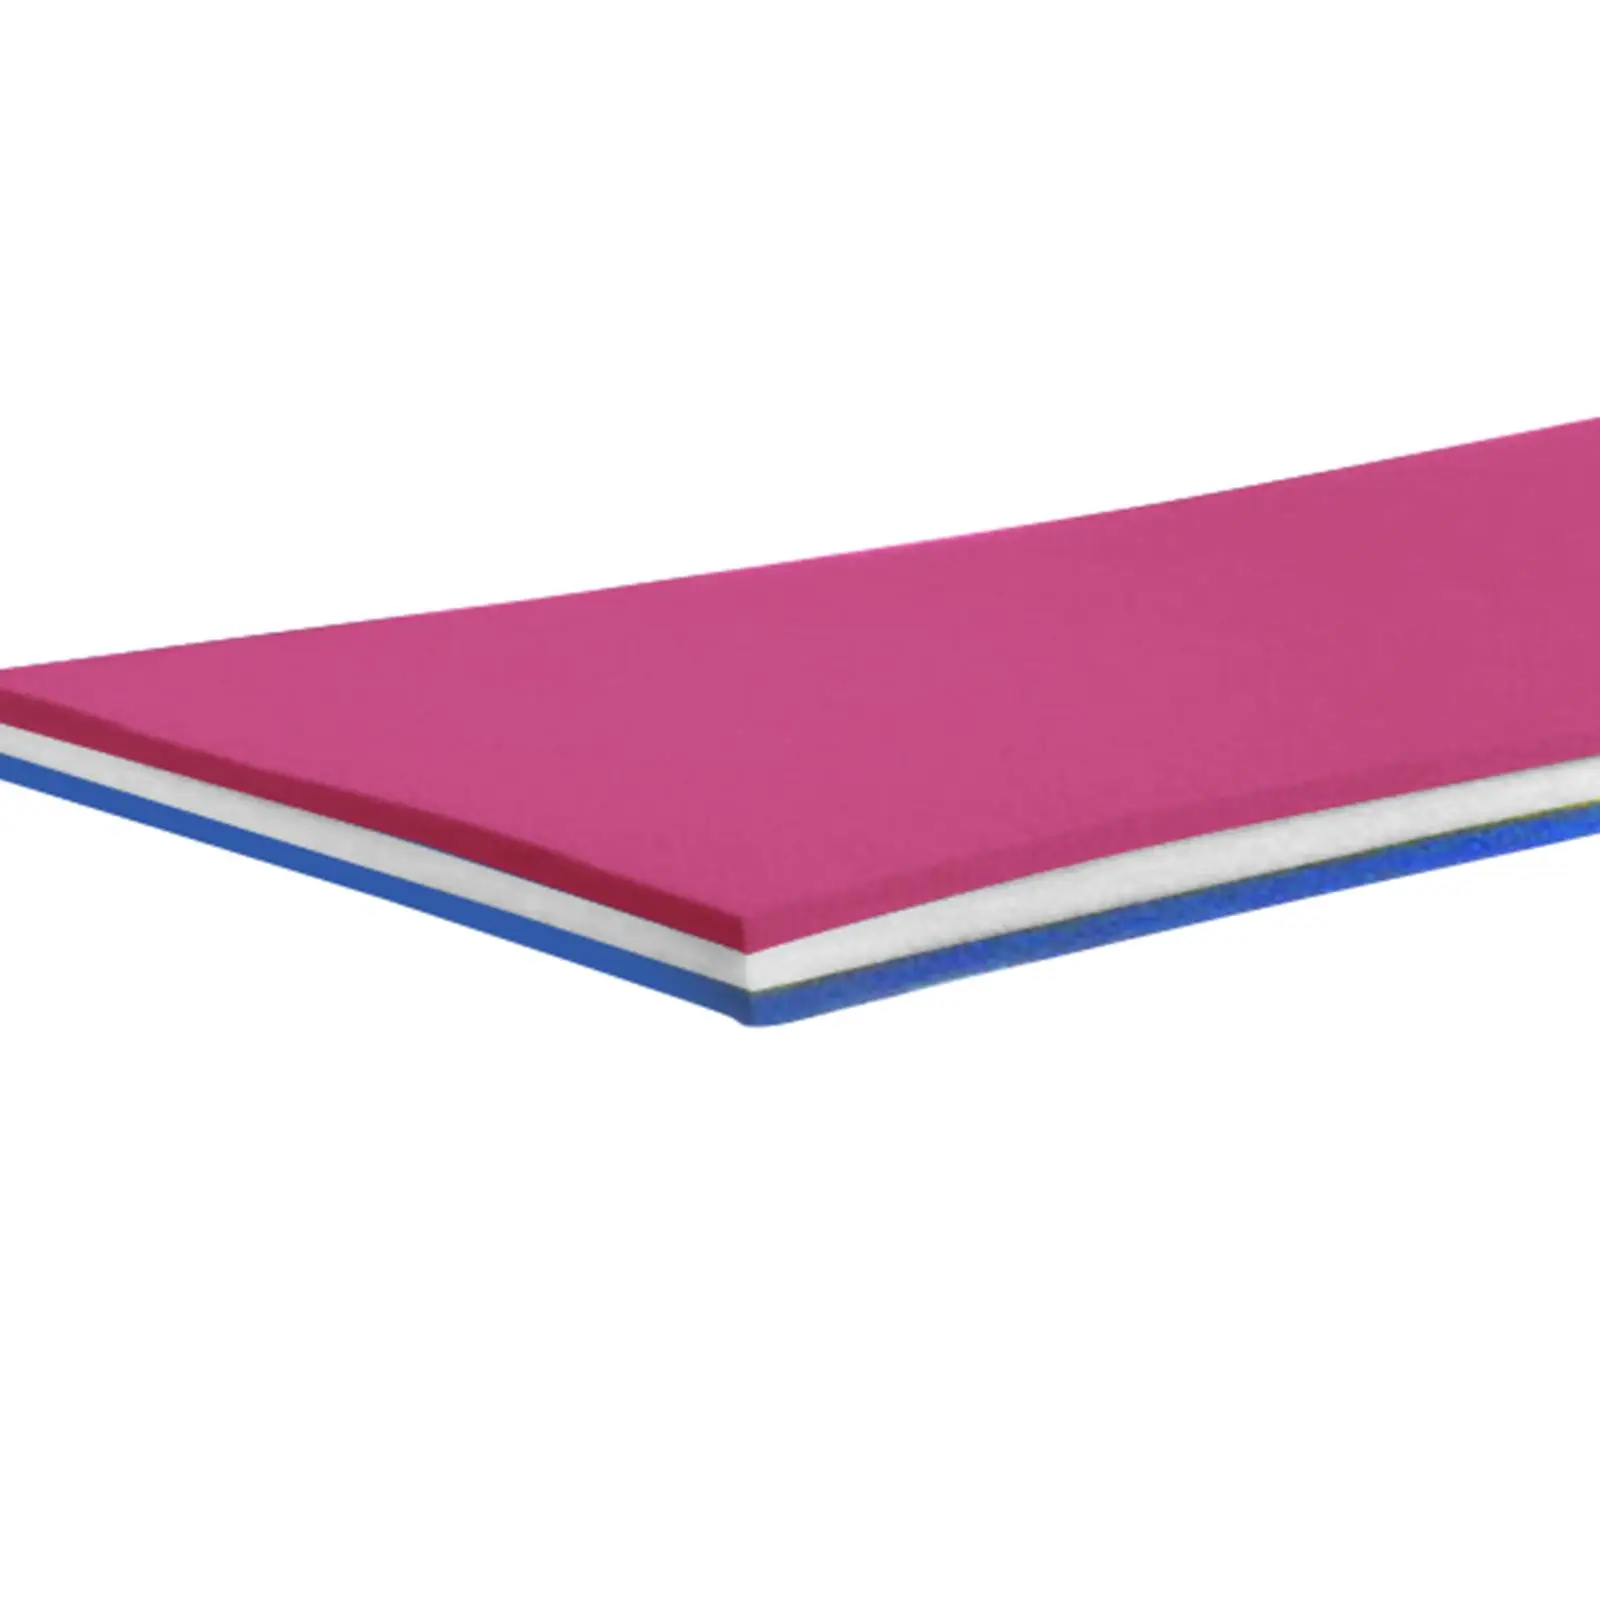 Floating Mat Pad Cushion 3 Layer 110cmx40x3.2cm Lightweight Portable for Relaxation Durable Roll up Pad Pink White Blue